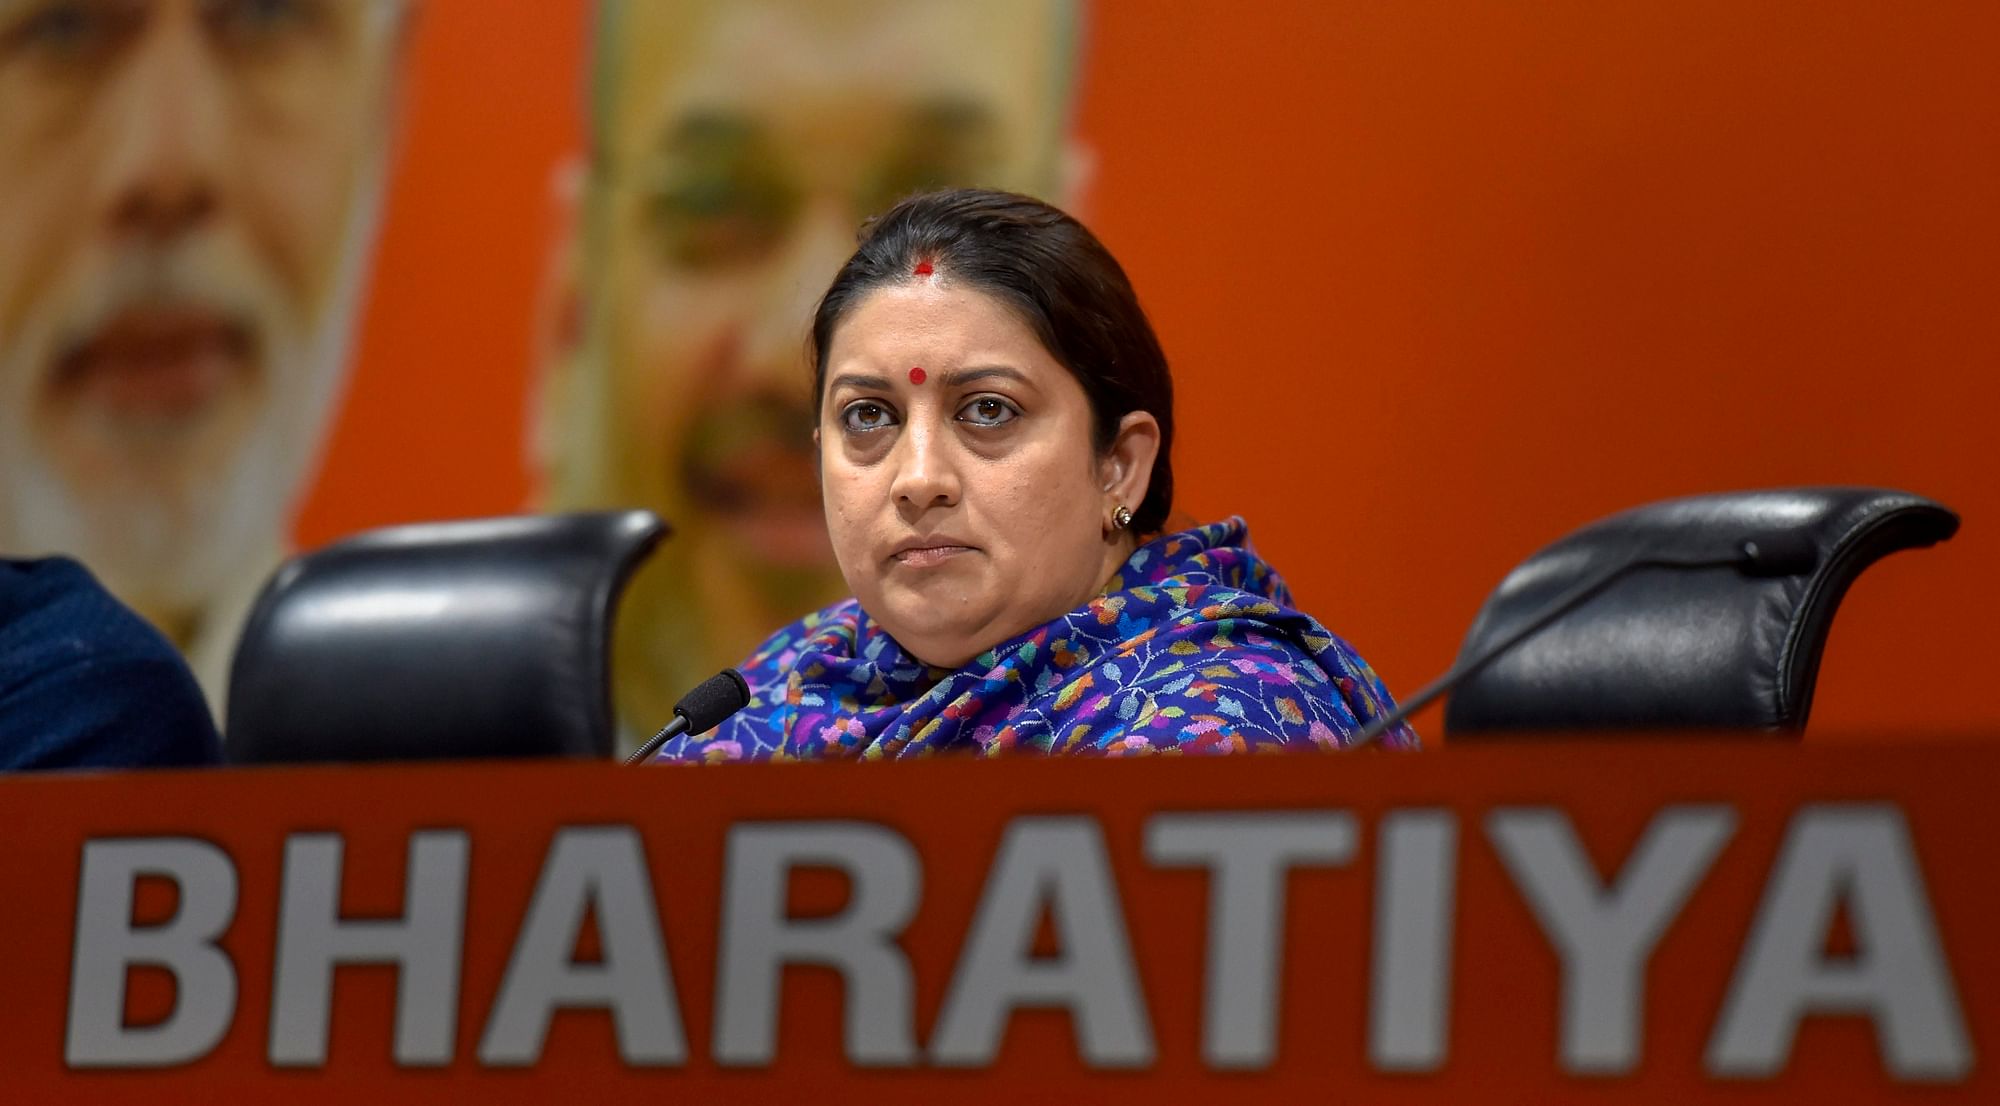 Irani visited Congress president Rahul Gandhi’s parliamentary constituency Amethi for a day on Friday.